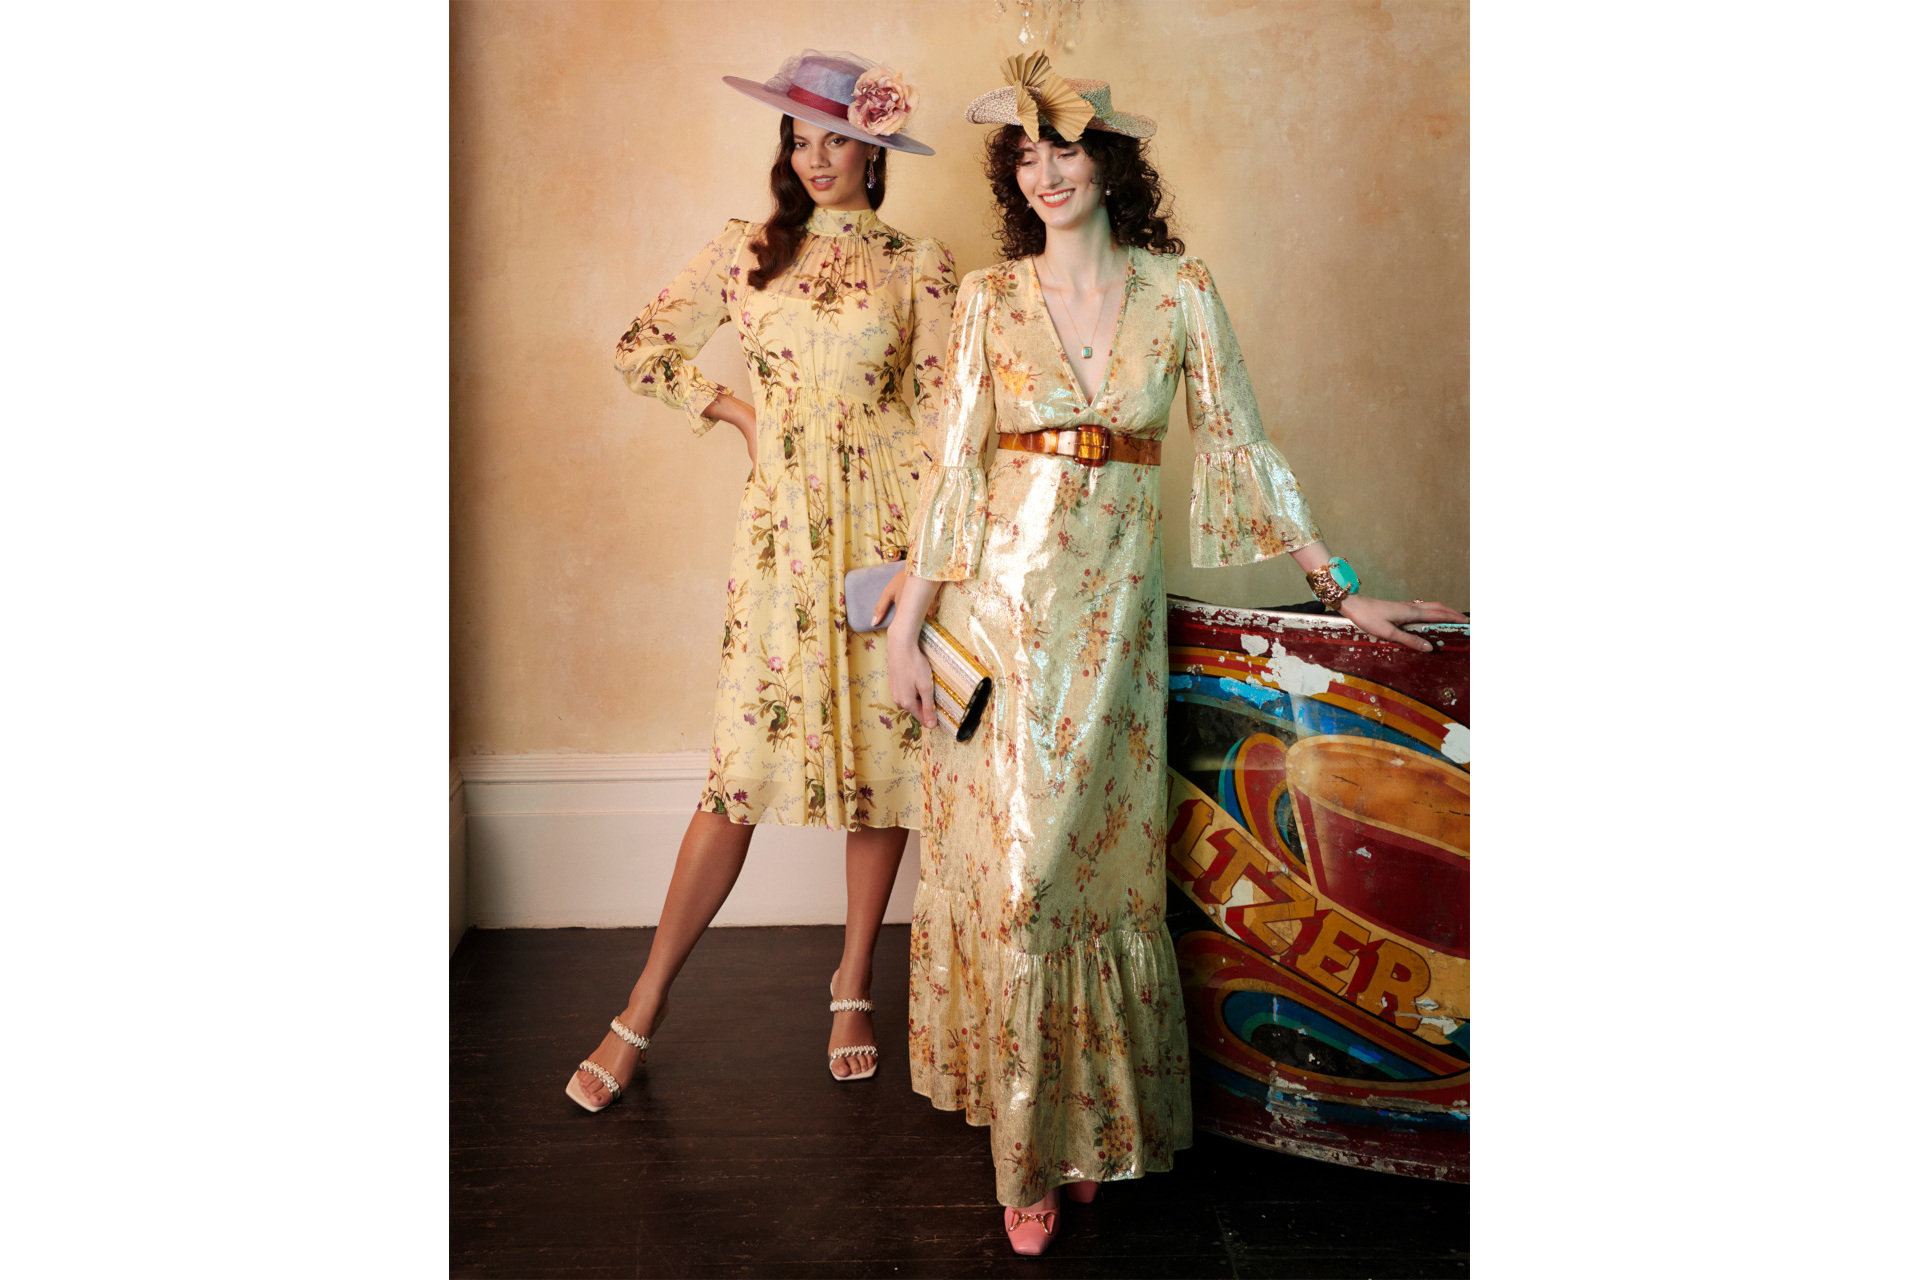 Two women in gold dresses